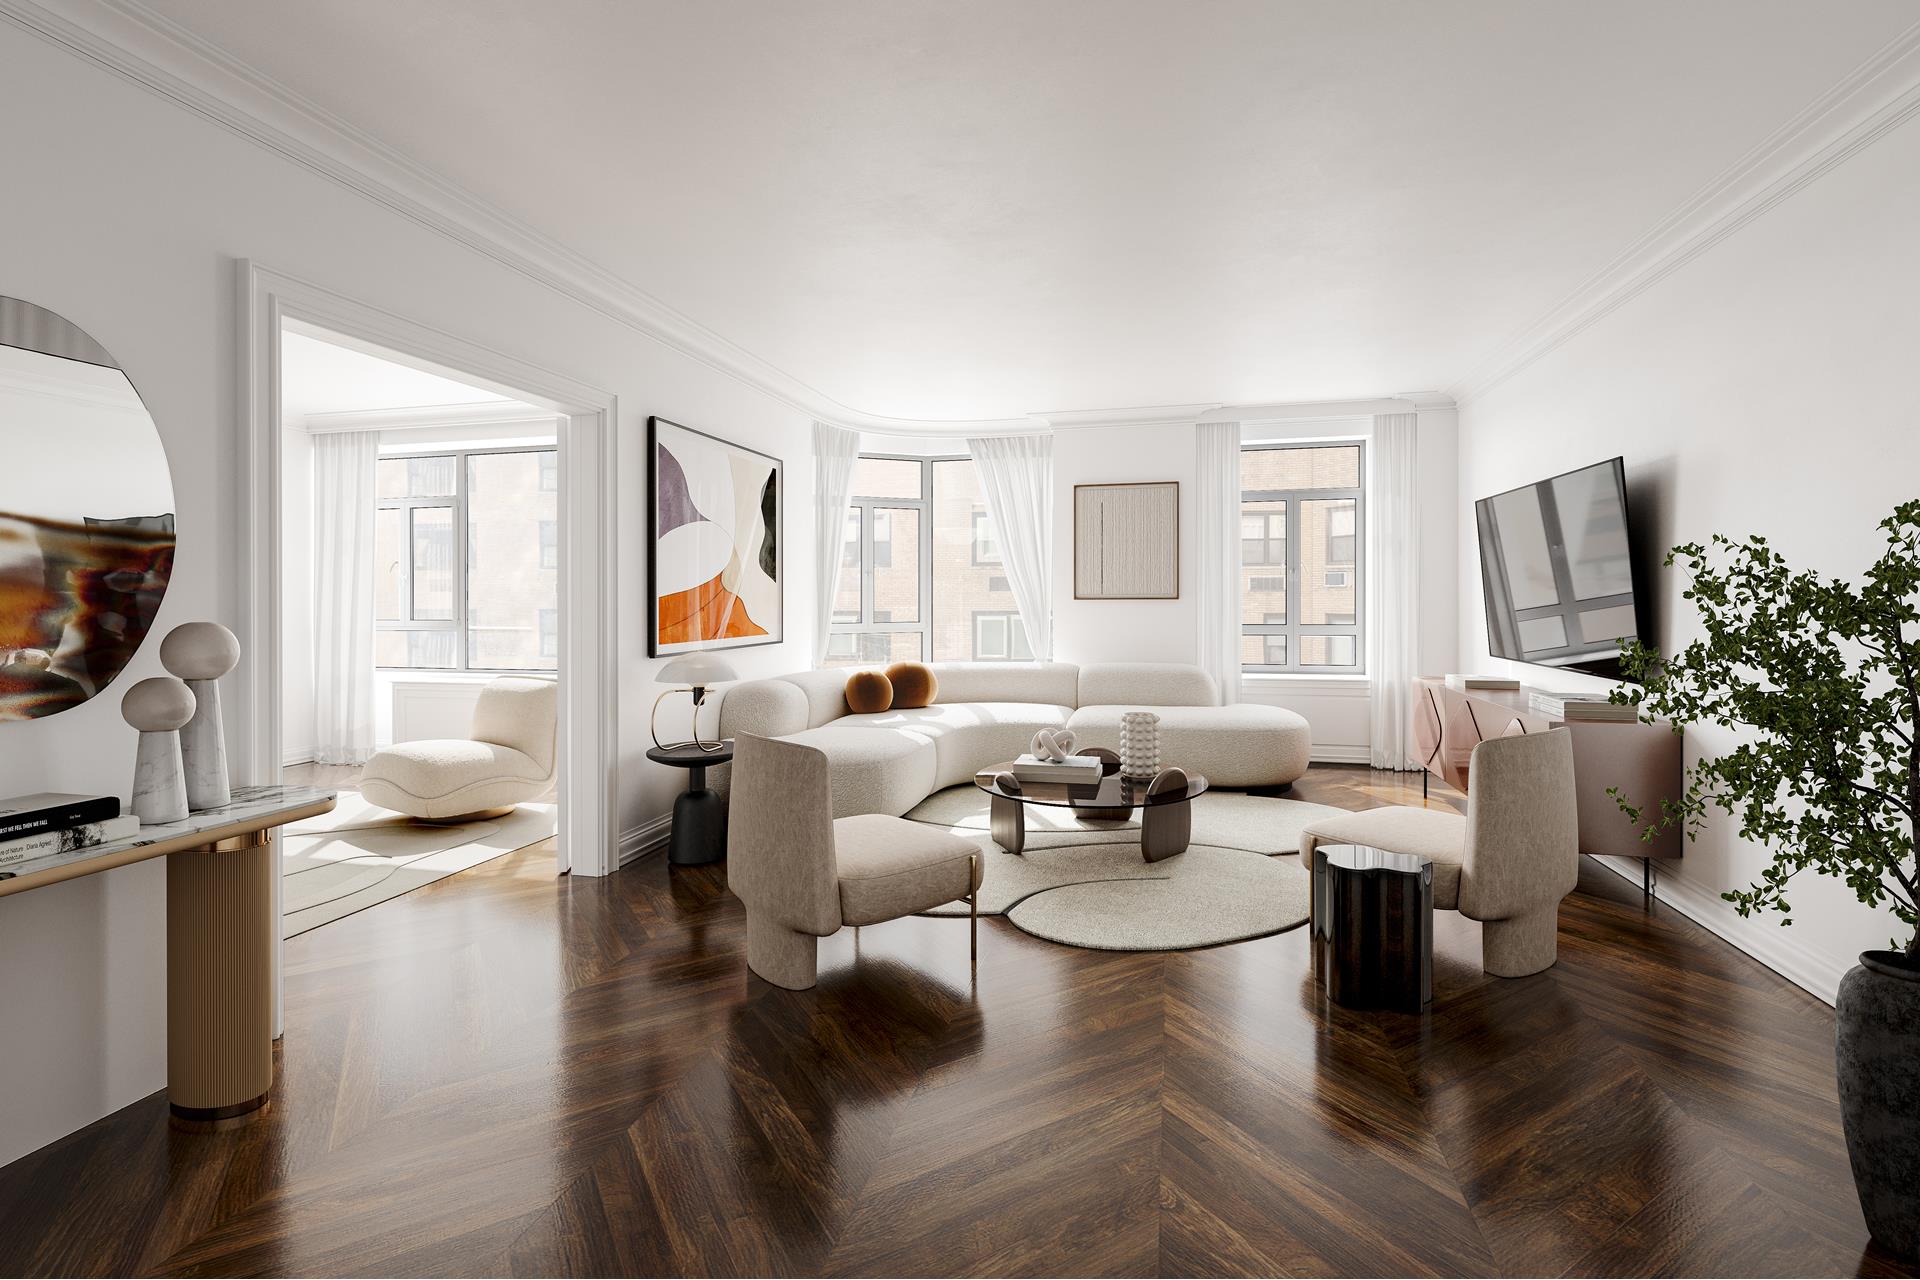 870 5th Avenue 5E, Lenox Hill, Upper East Side, NYC - 2 Bedrooms  
2 Bathrooms  
5 Rooms - 